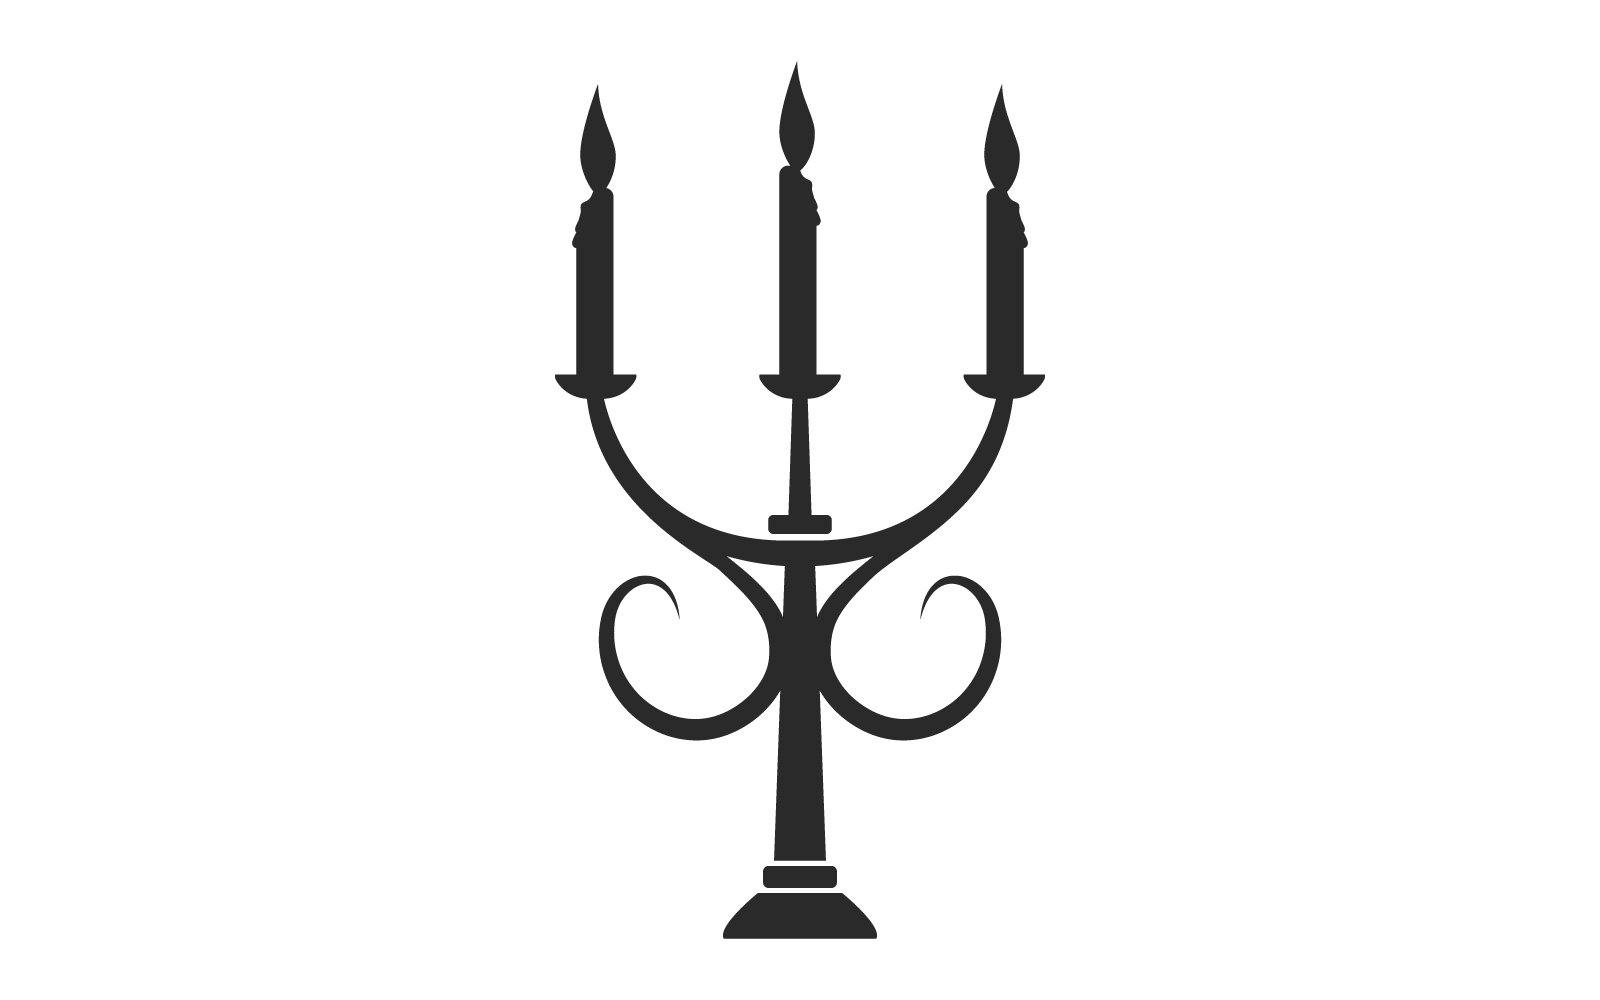 Candlelight dinner icon in flat design template